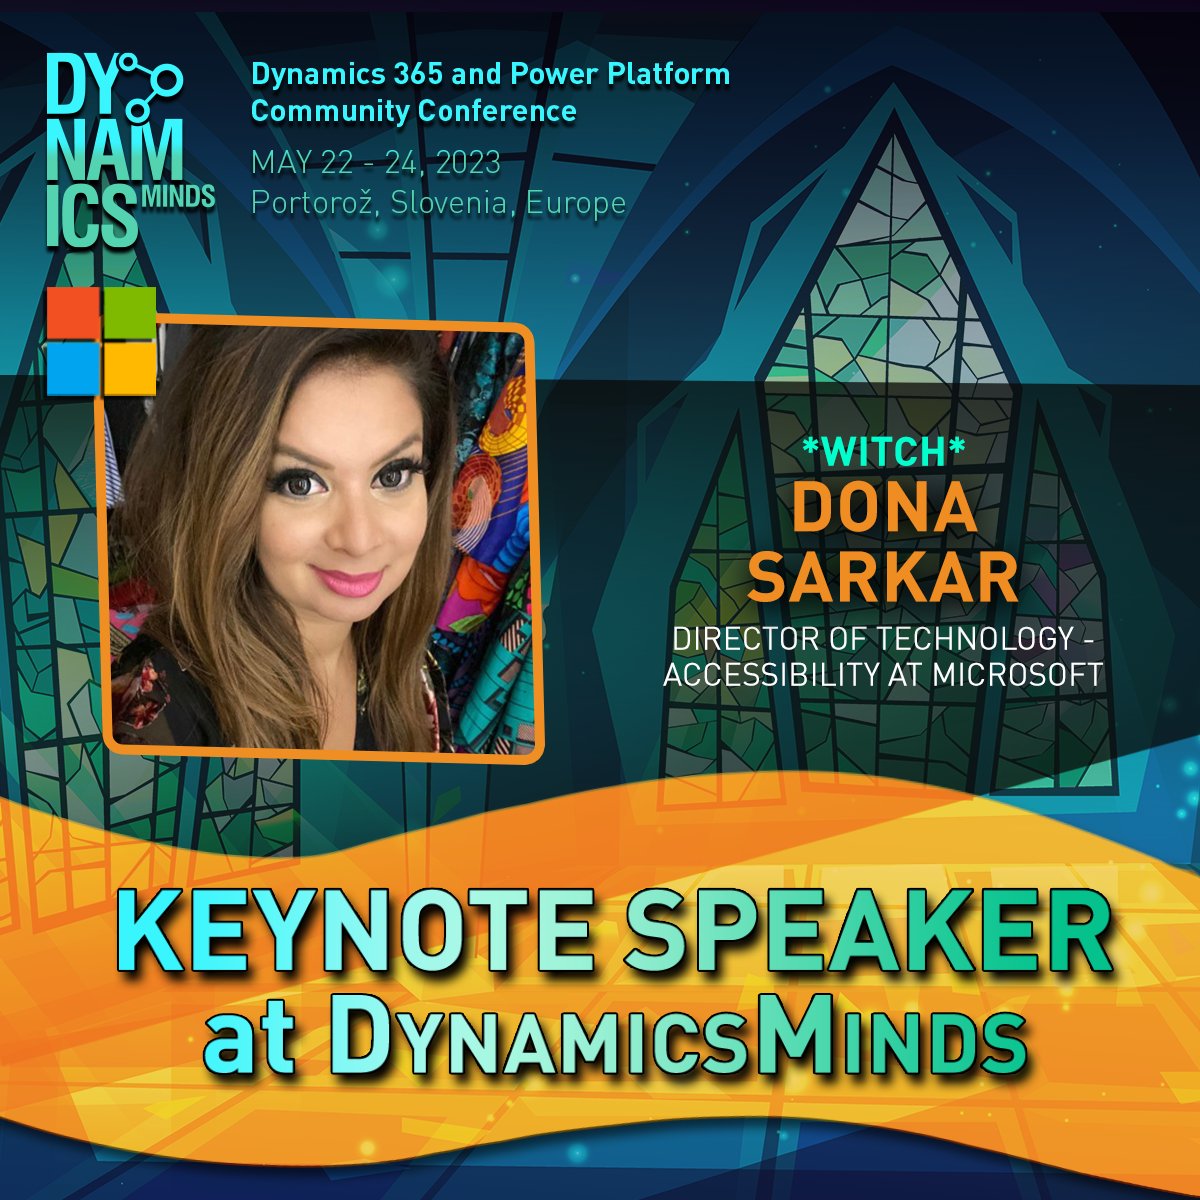 📢 KEYNOTE ANNOUNCEMENT 📢

💥#DynamicsMinds proudly presents ⭐KEYNOTE SPEAKER⭐ @donasarkar, Director of Technology - Accessibility at @Microsoft.

Let’s learn, network, have fun and together make the community shine!

#dynamics365 #powerplatform #bizapps #communityconference